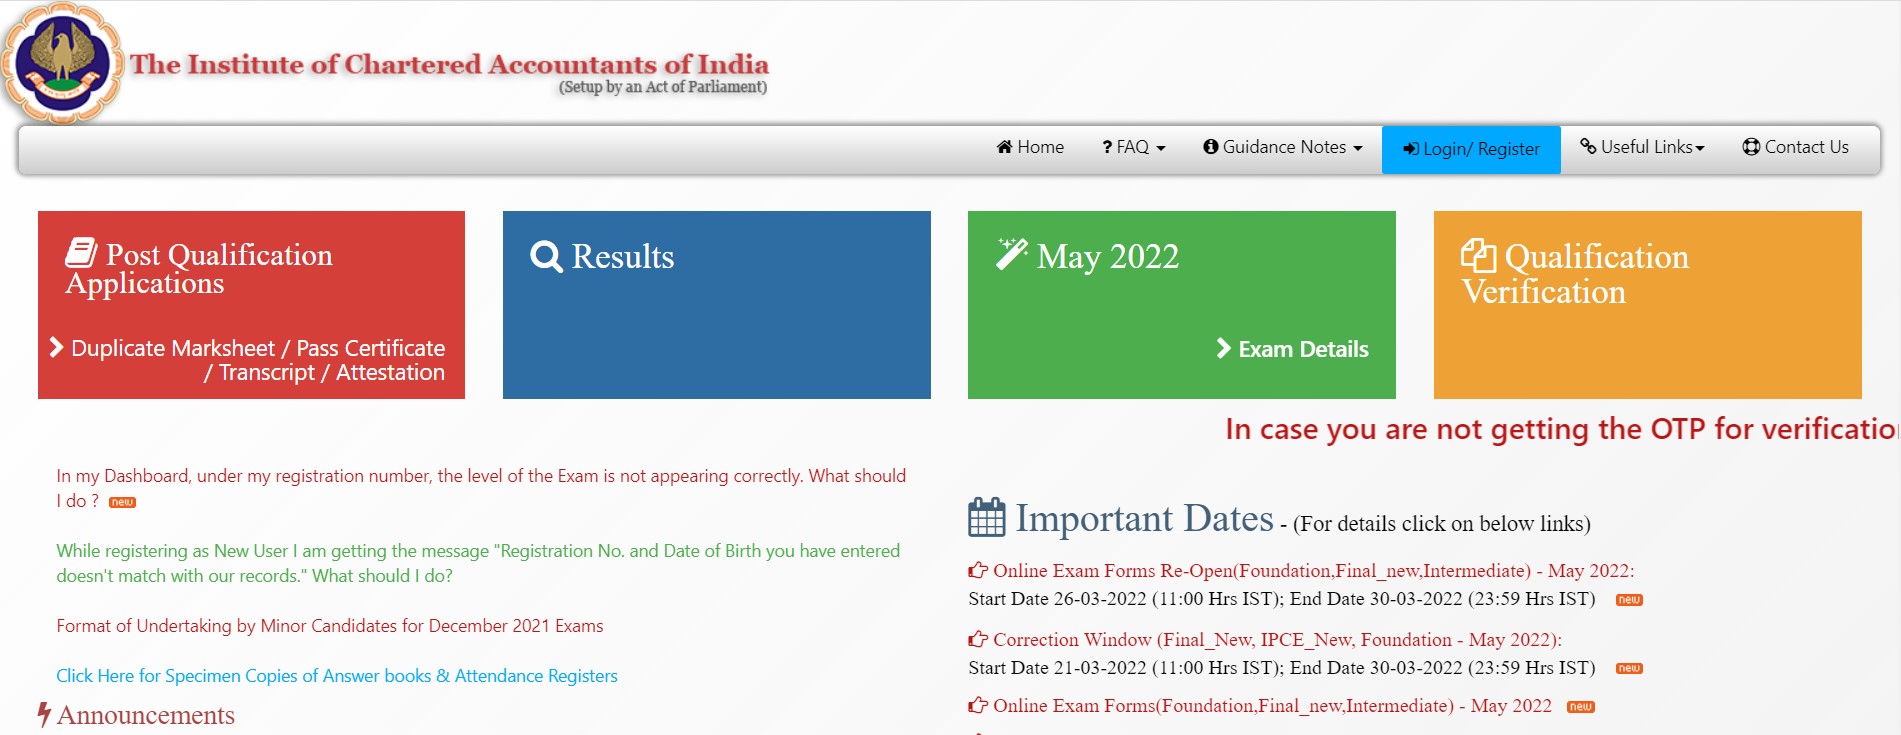 Downloading the CA Final Admit Card